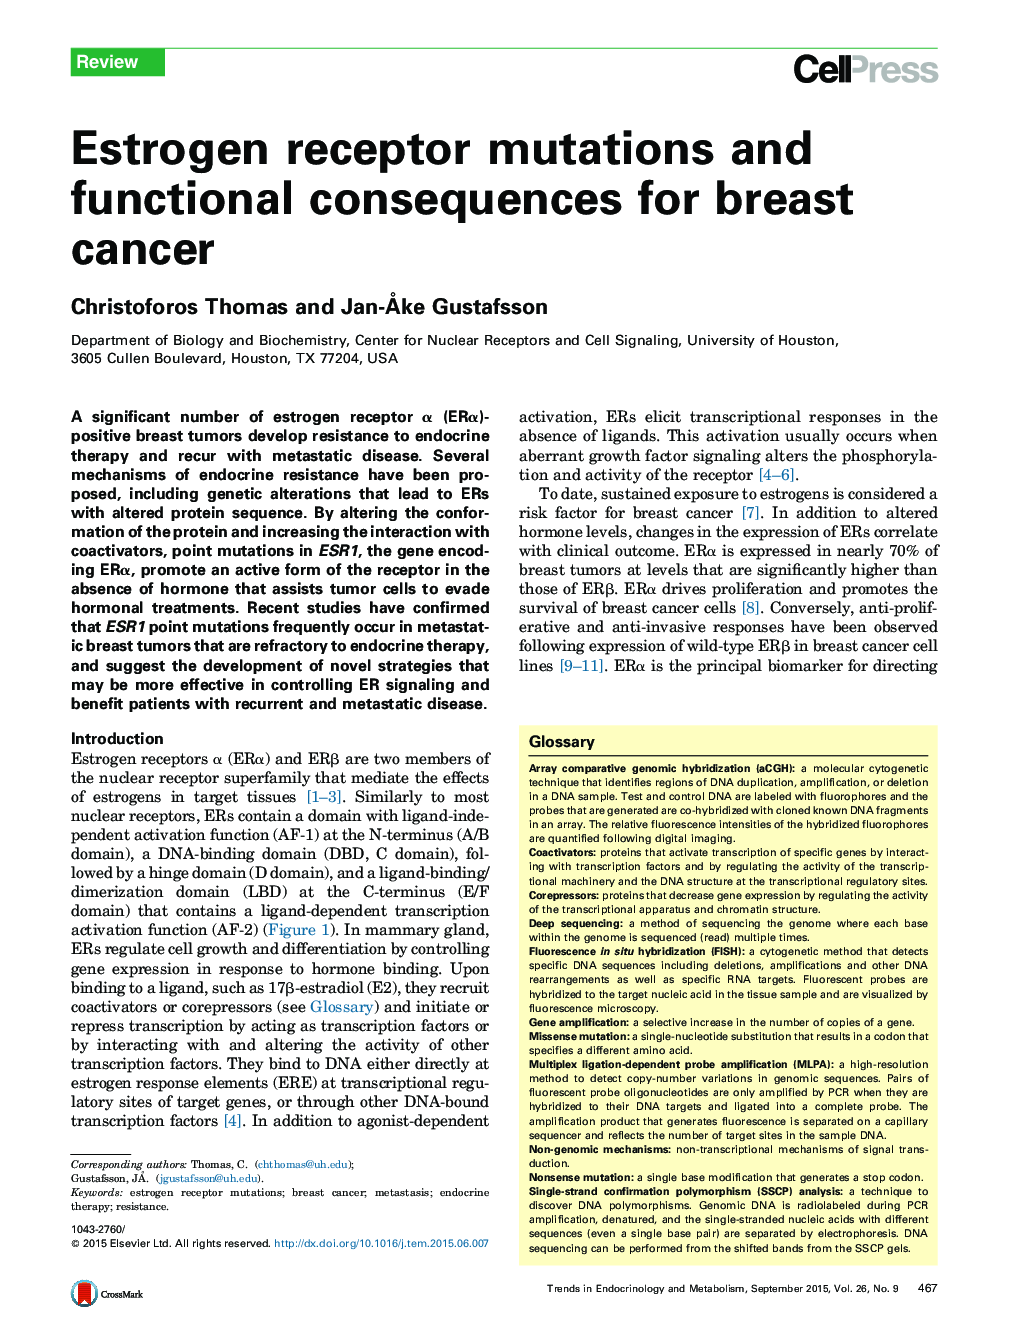 Estrogen receptor mutations and functional consequences for breast cancer